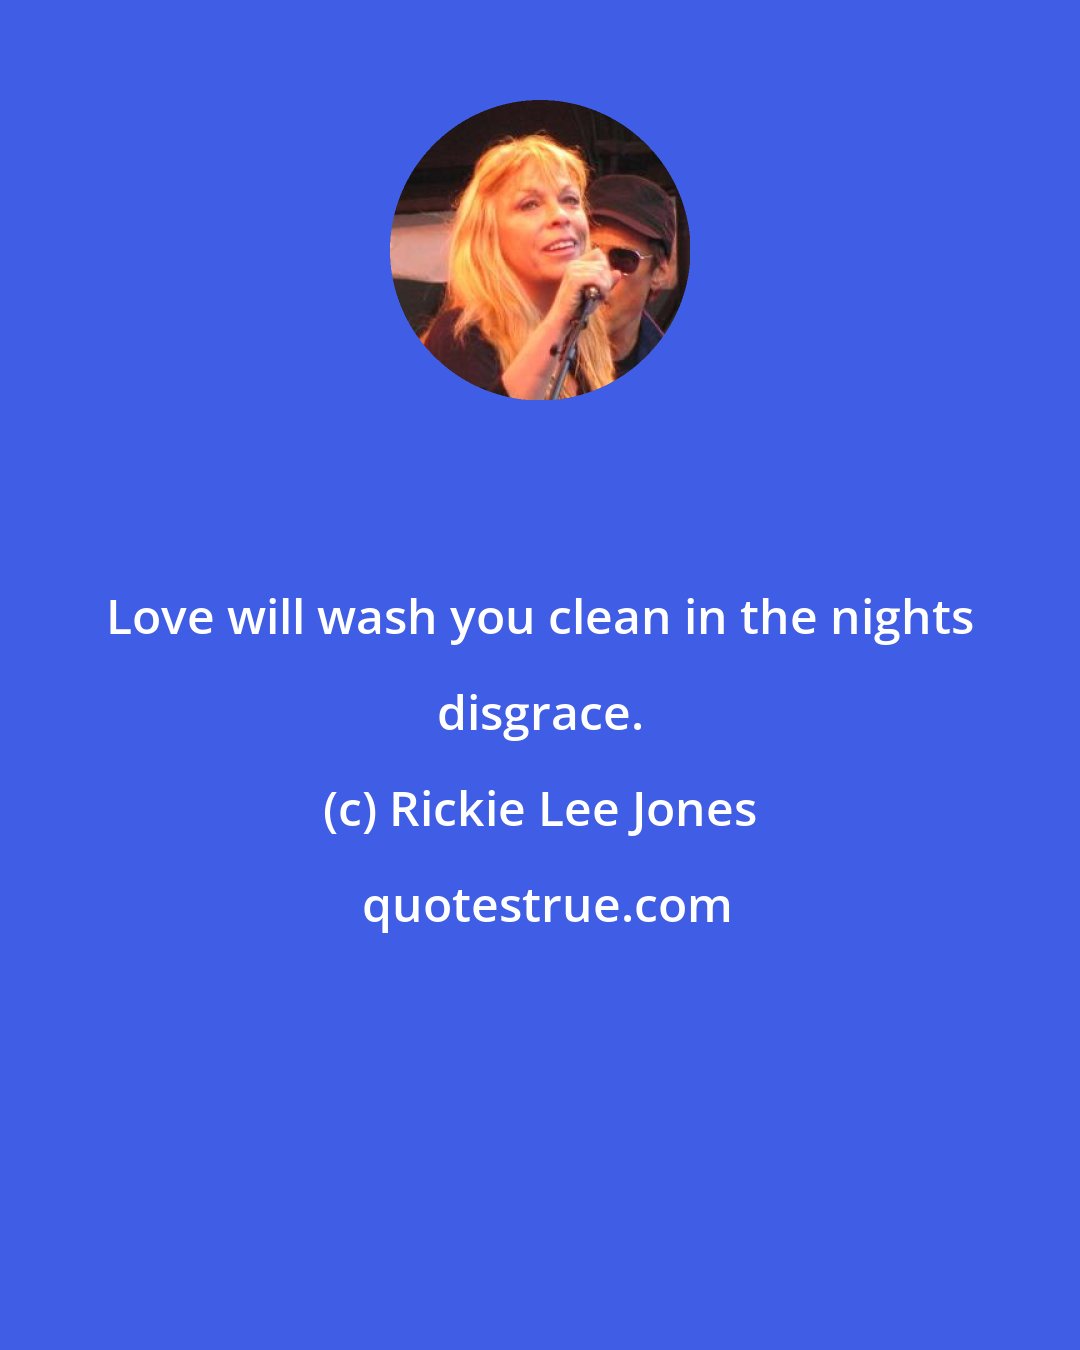 Rickie Lee Jones: Love will wash you clean in the nights disgrace.